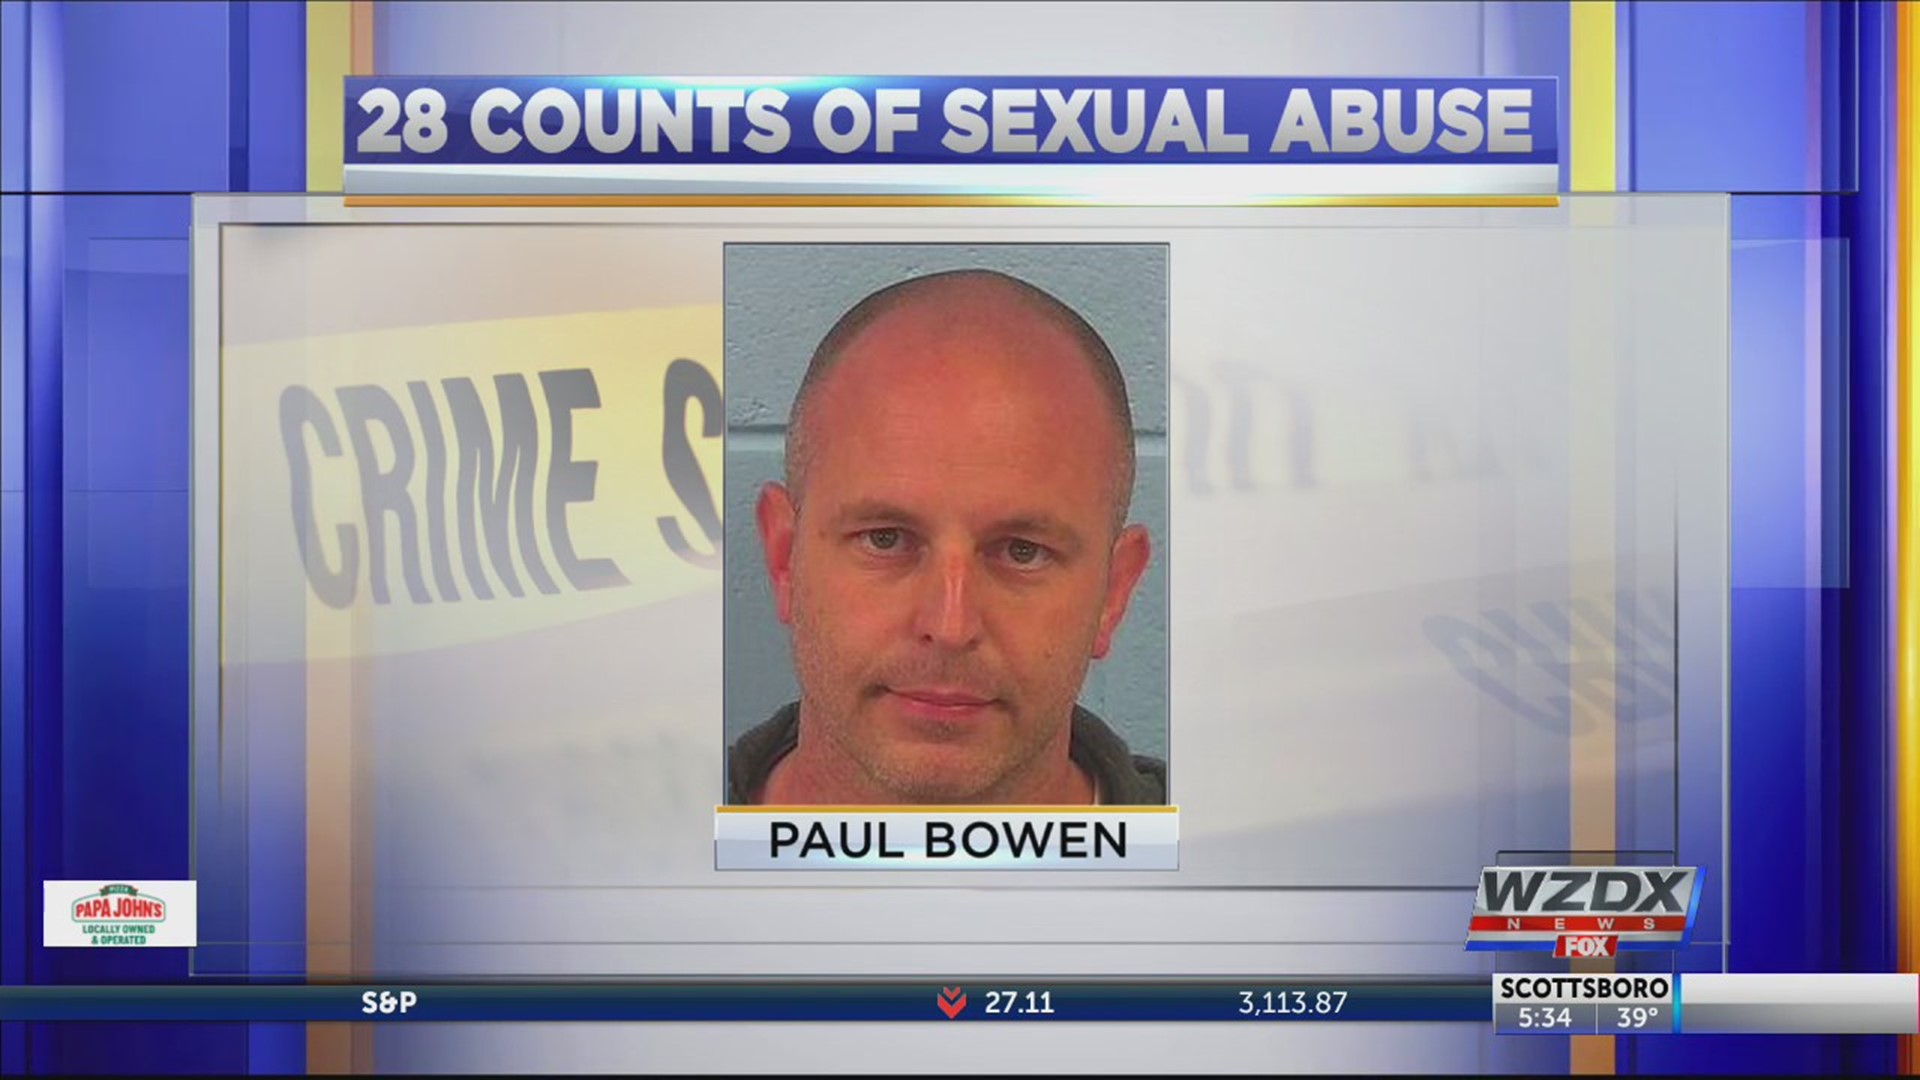 A Northeast Alabama evangelist pleads guilty to nearly 30 counts of sexual abuse.